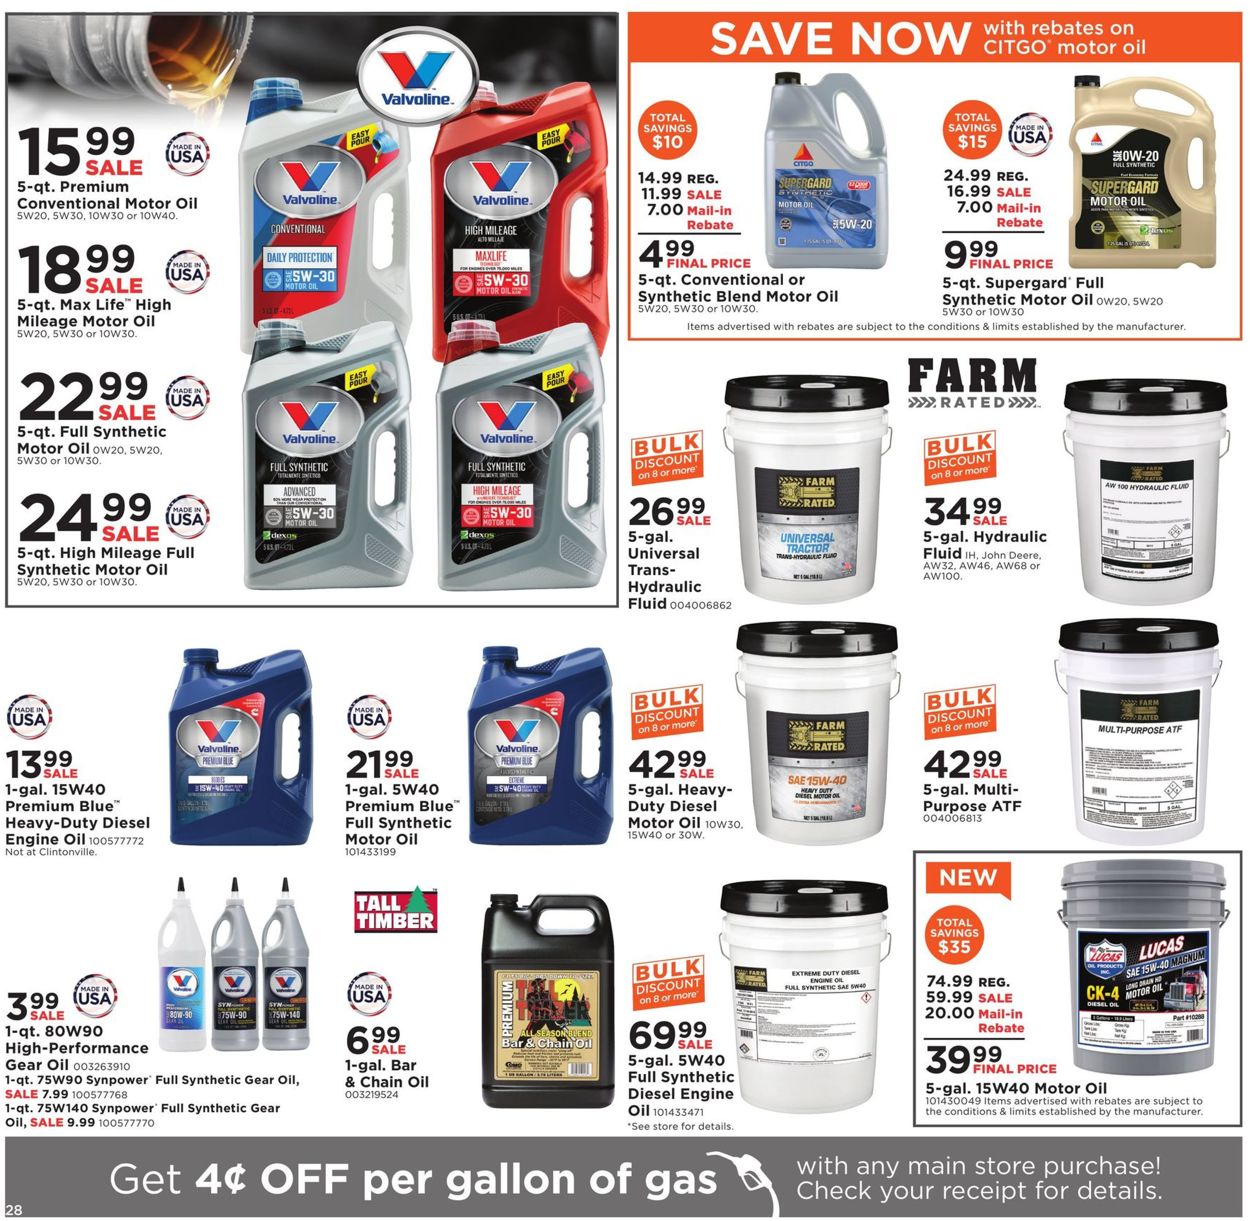 Mills Fleet Farm Current Weekly Ad 04 10 04 18 2020 28 Frequent 